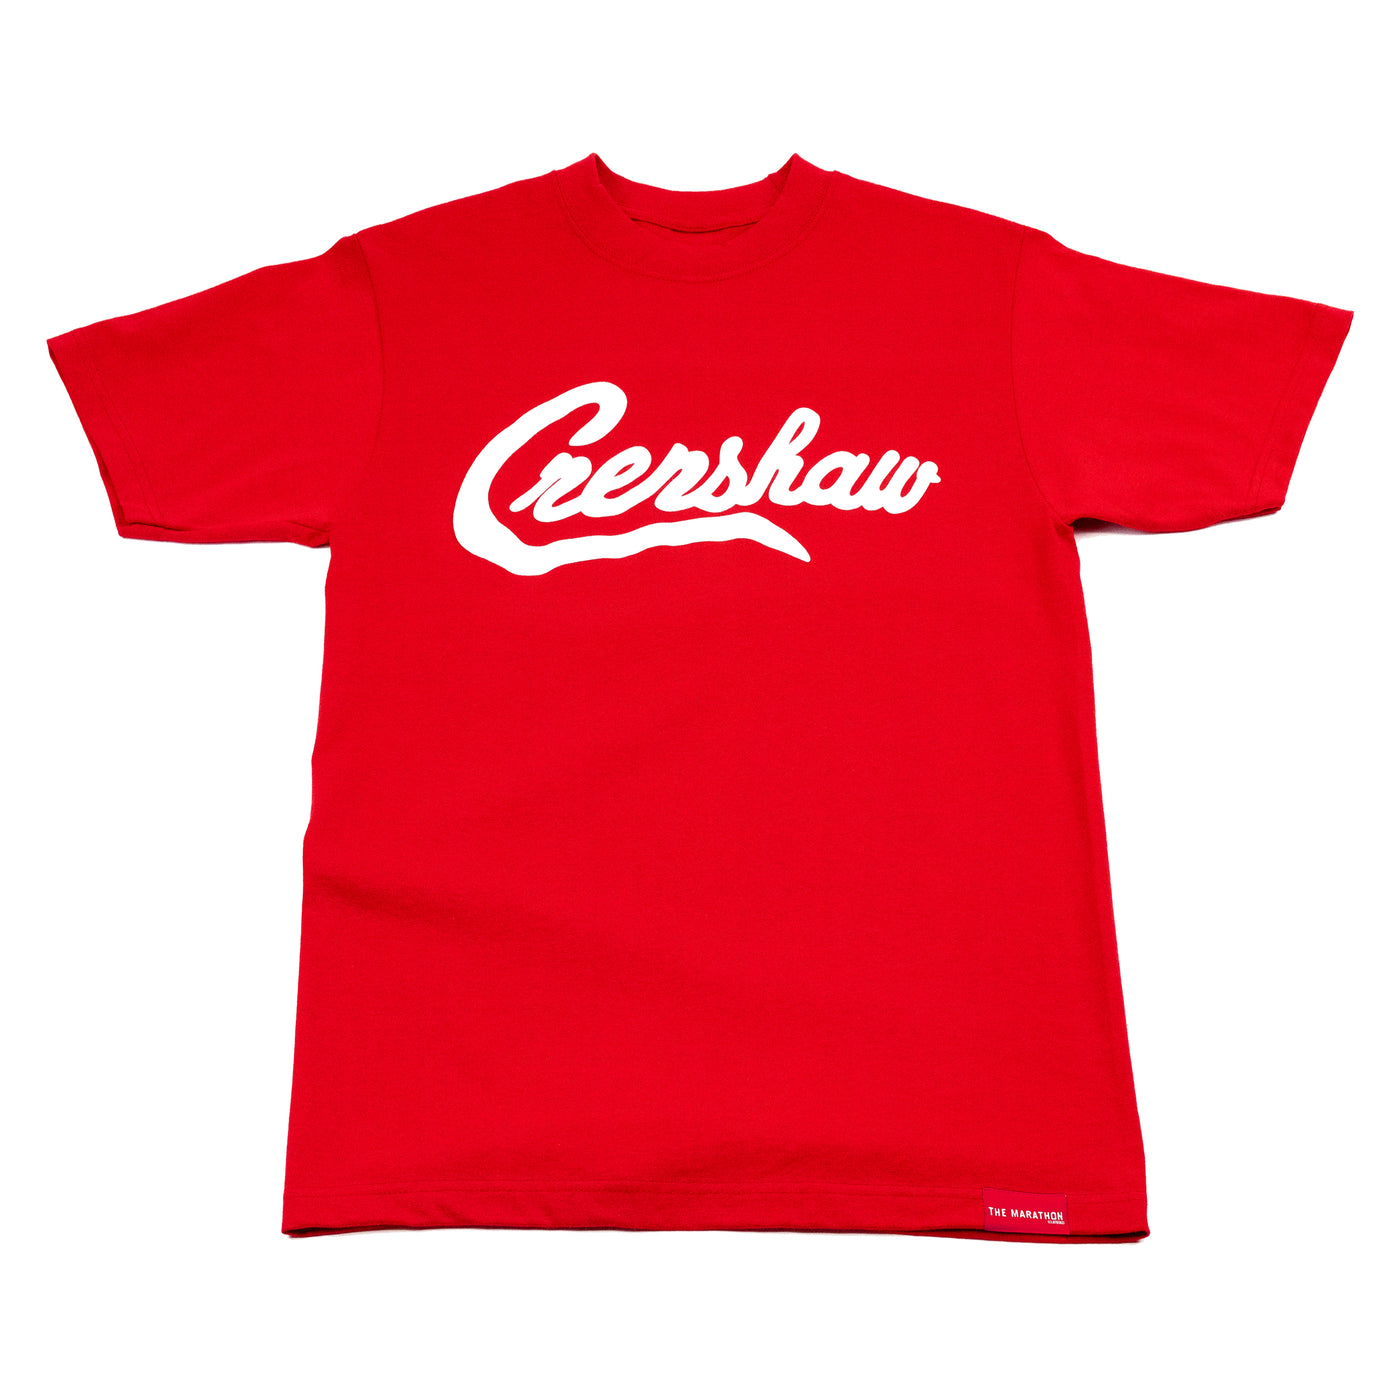 Crenshaw T-Shirt - Red/White - Front